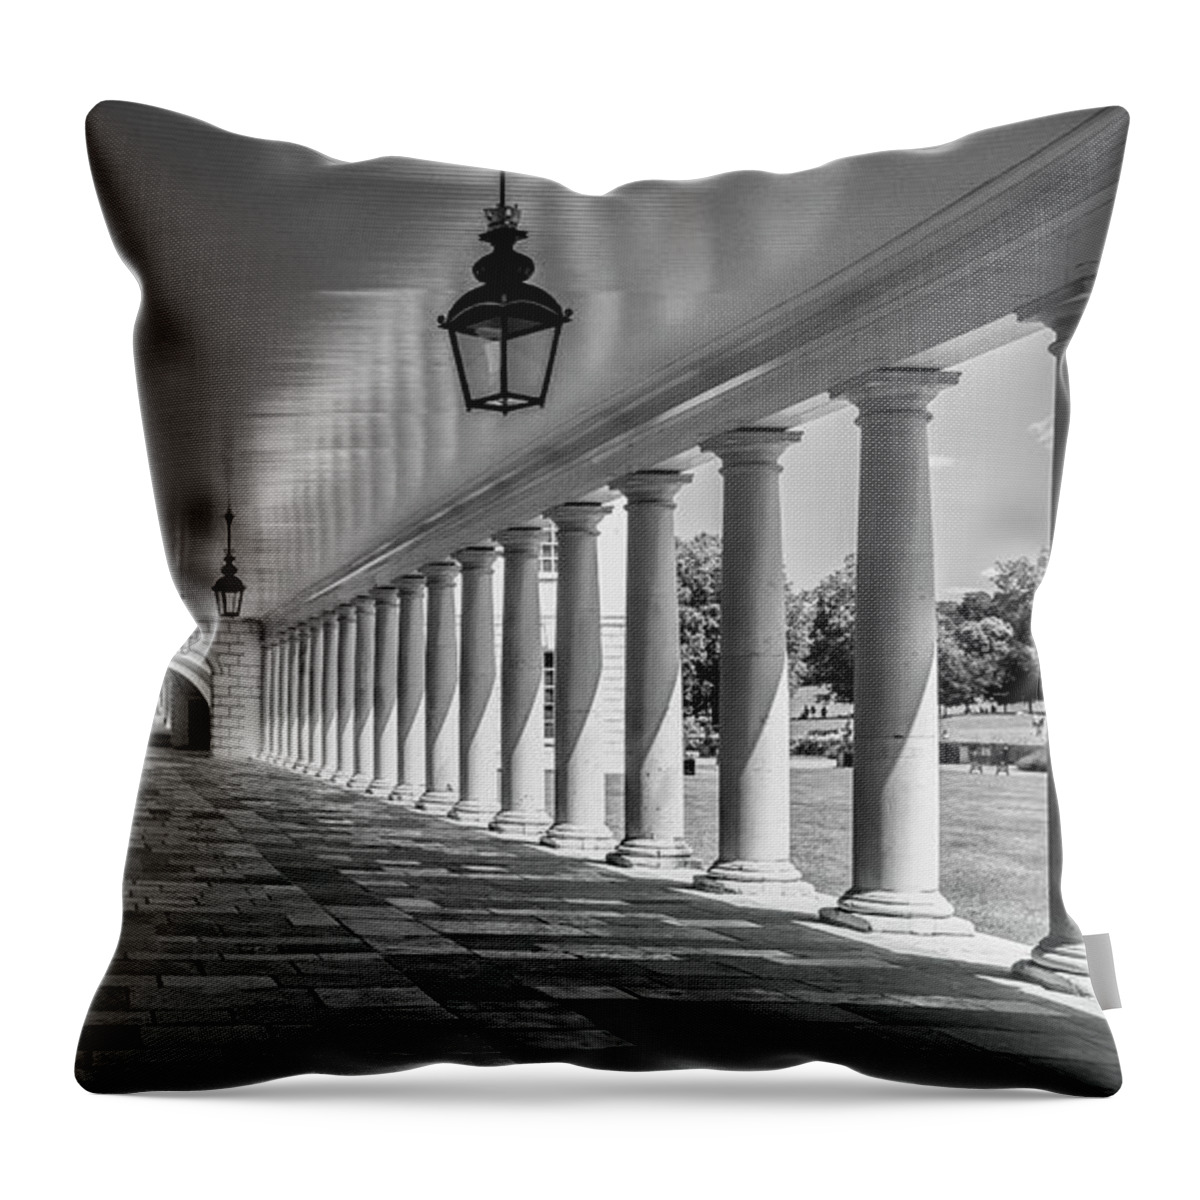 Cityscape Throw Pillow featuring the photograph Colonnade by Remigiusz MARCZAK